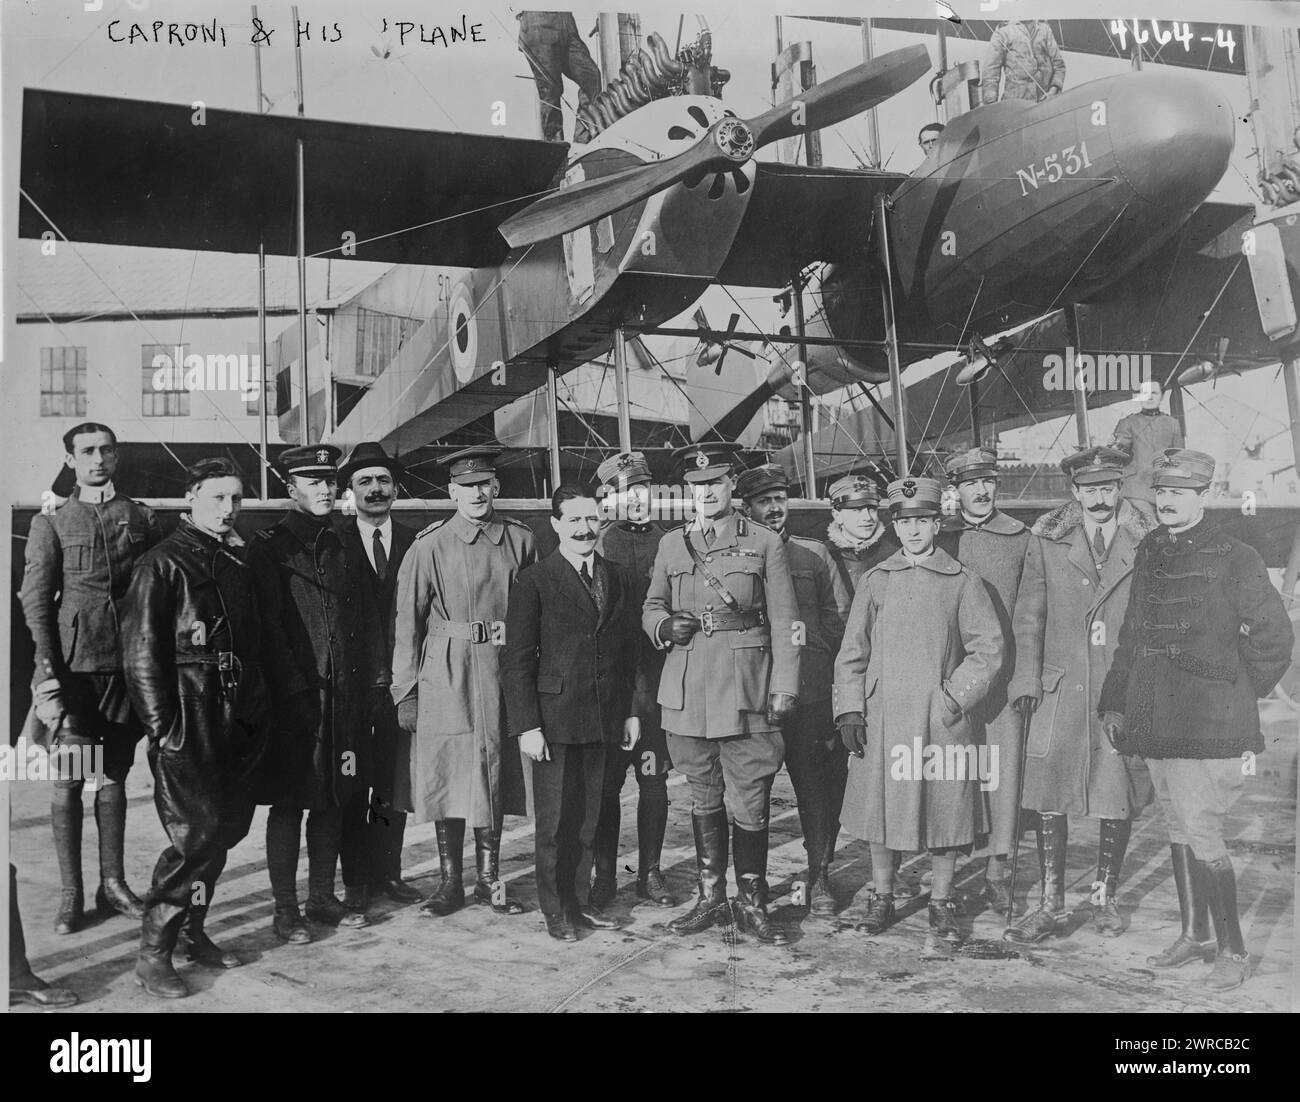 Caproni & his plane, Photograph shows Giovanni Battista Caproni (1886-1957), an Italian aeronautical engineer and founder of the Caproni aircraft manufacturing company with group of people in front of 'The Caproni Flight', an enormous triplane bomber N531., 1918 July 29, Glass negatives, 1 negative: glass Stock Photo